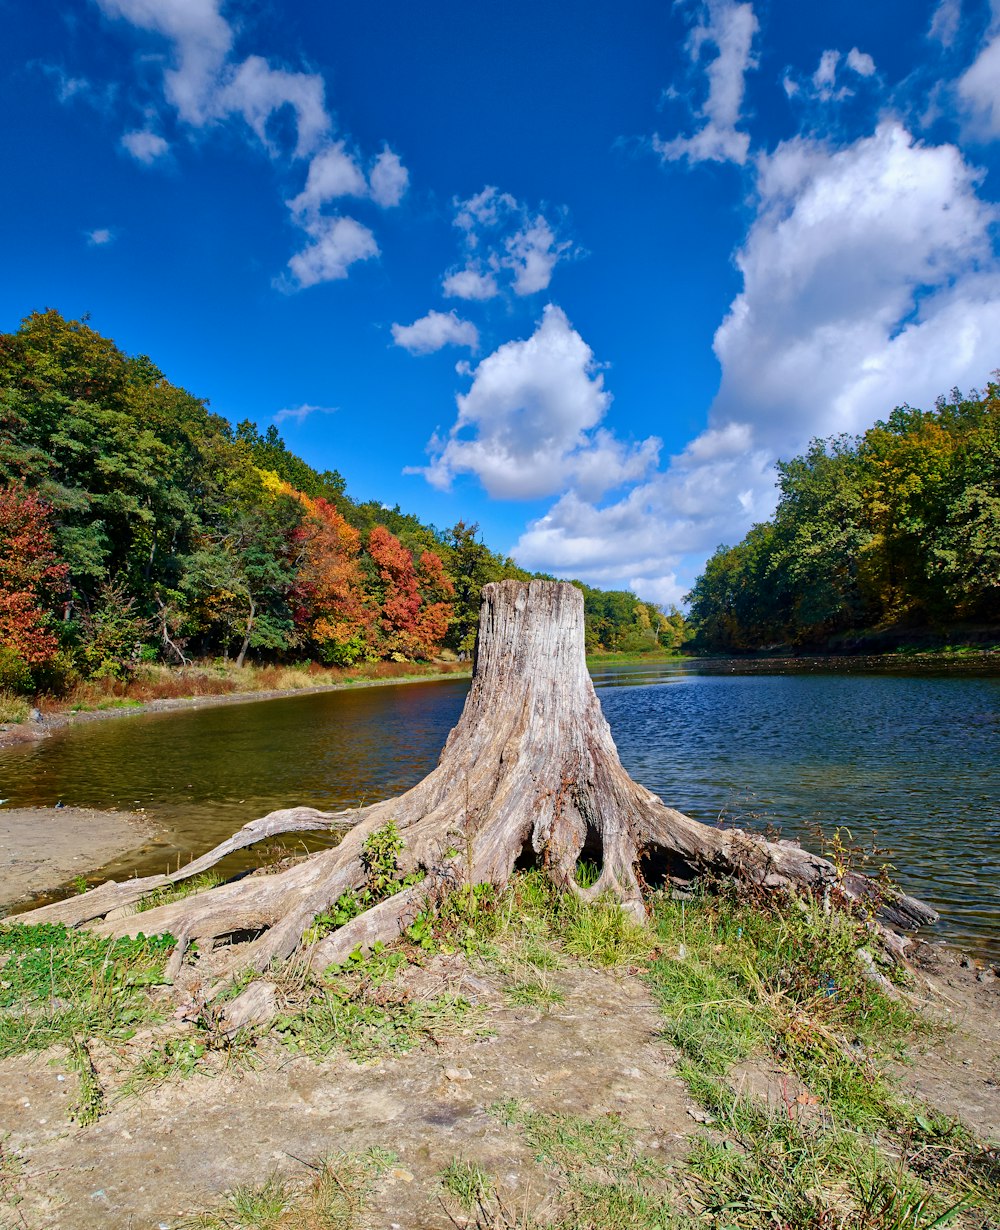 brown tree trunk on river side during daytime